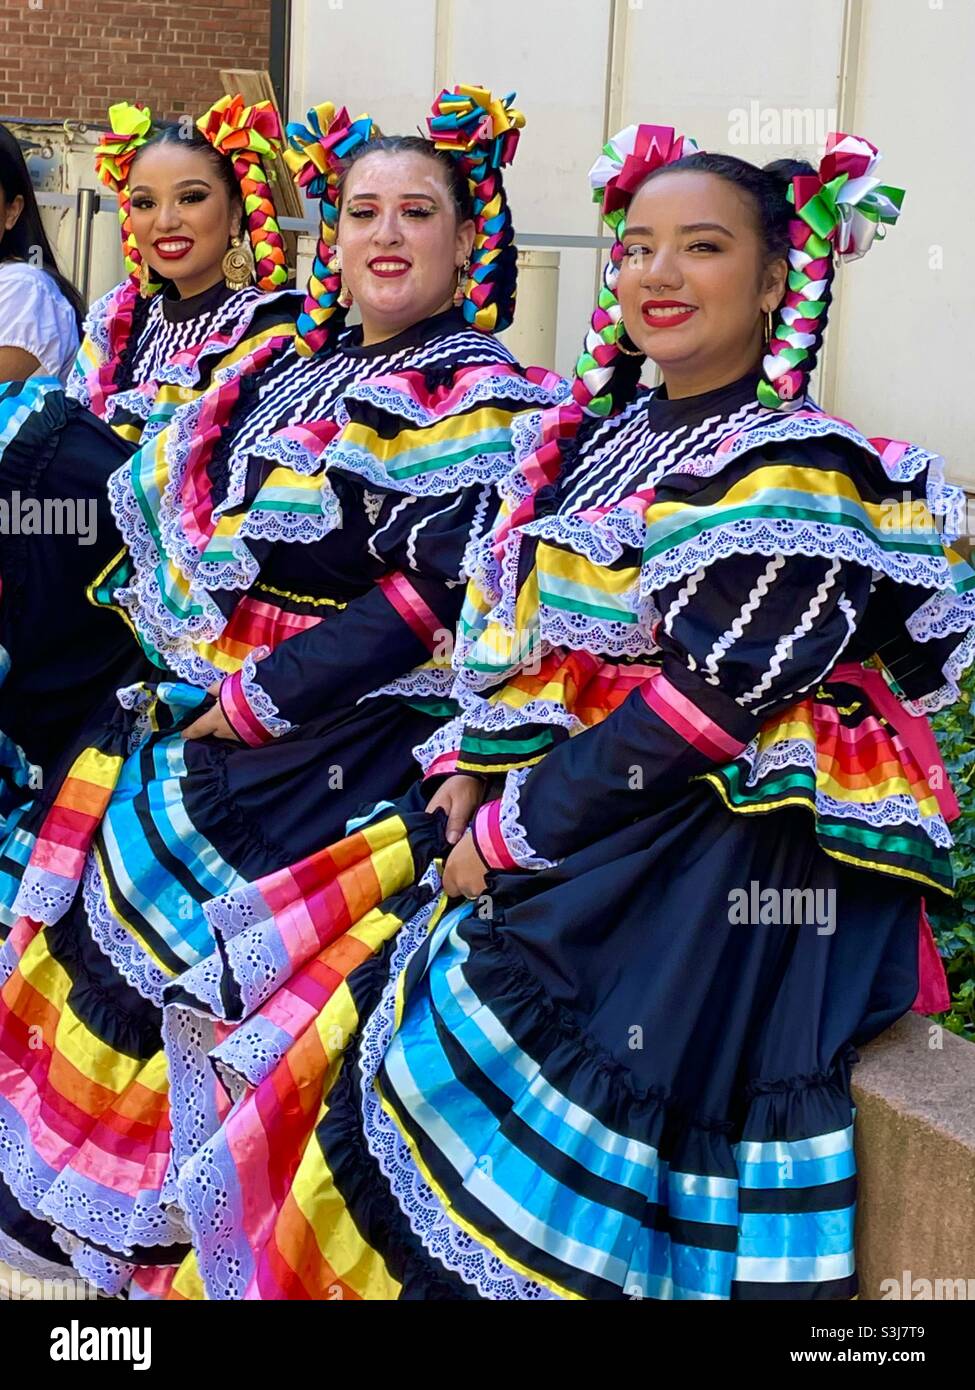 Three smiling women dancers wearing colorful traditional Mexican dresses Stock Photo